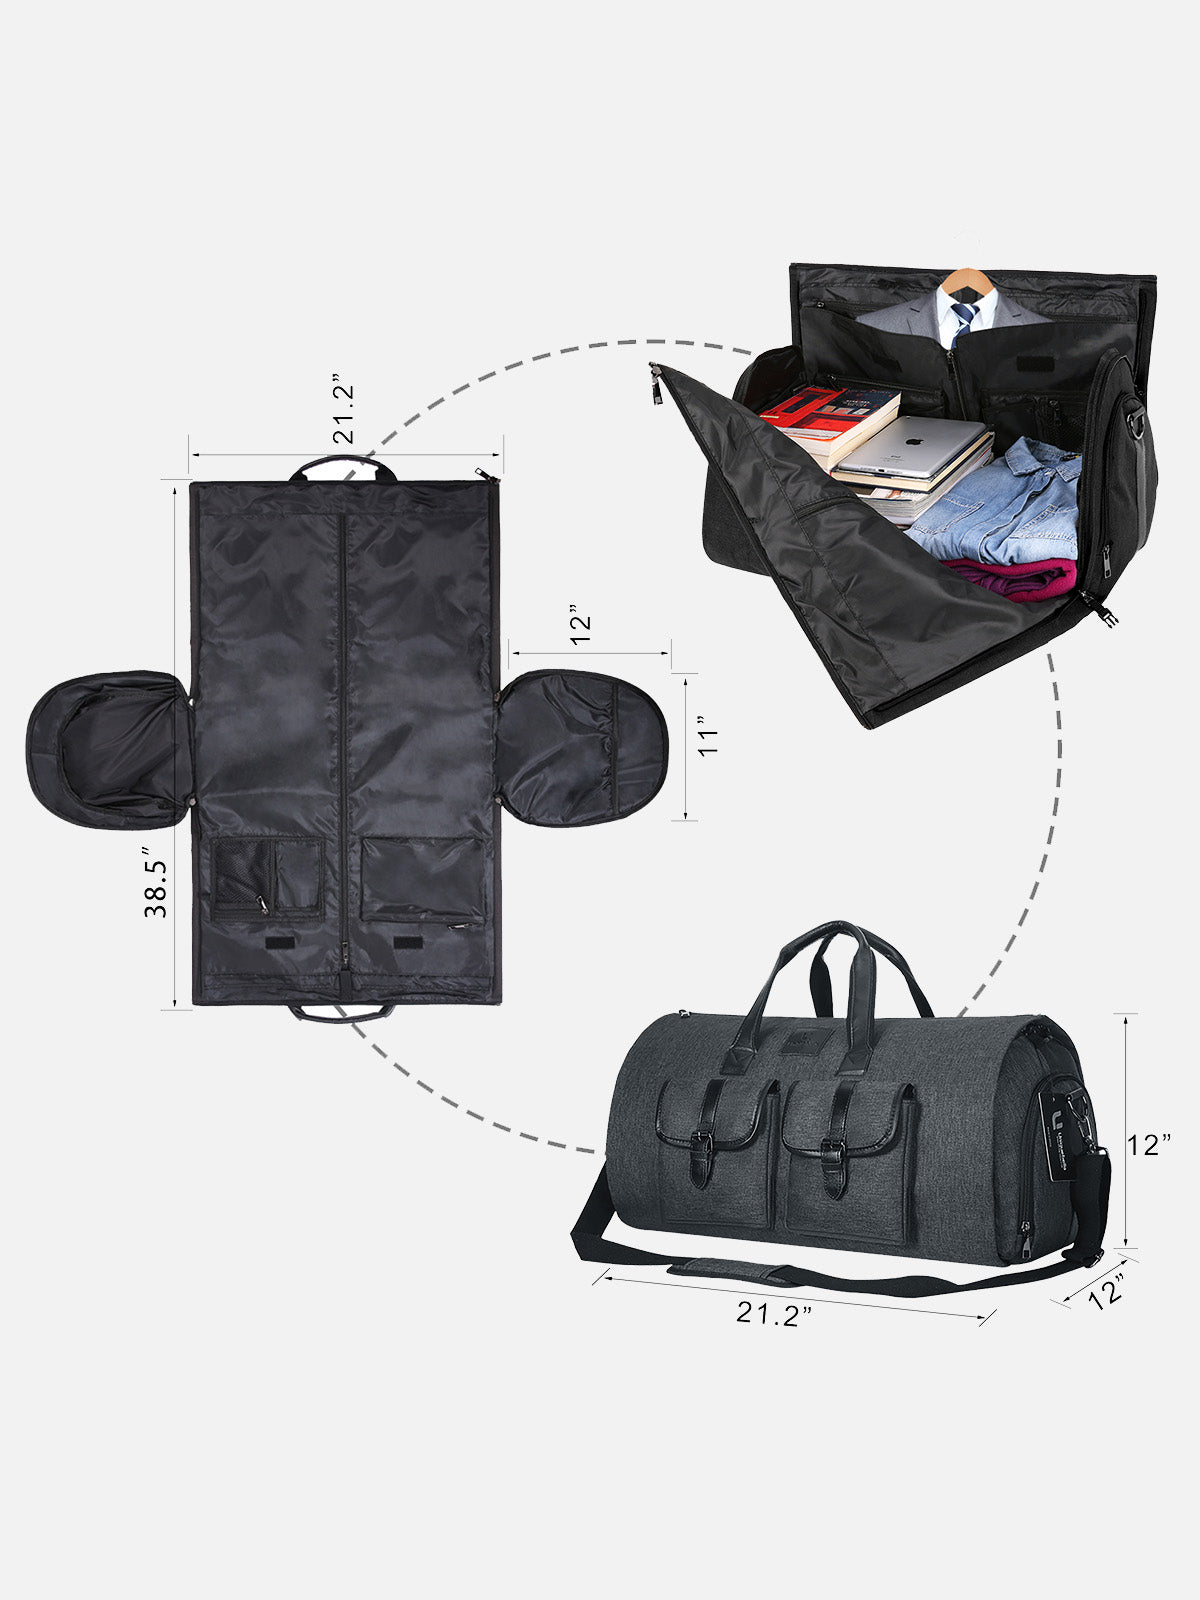 Garment Bags for Travel, Convertible Suit Travel Bag